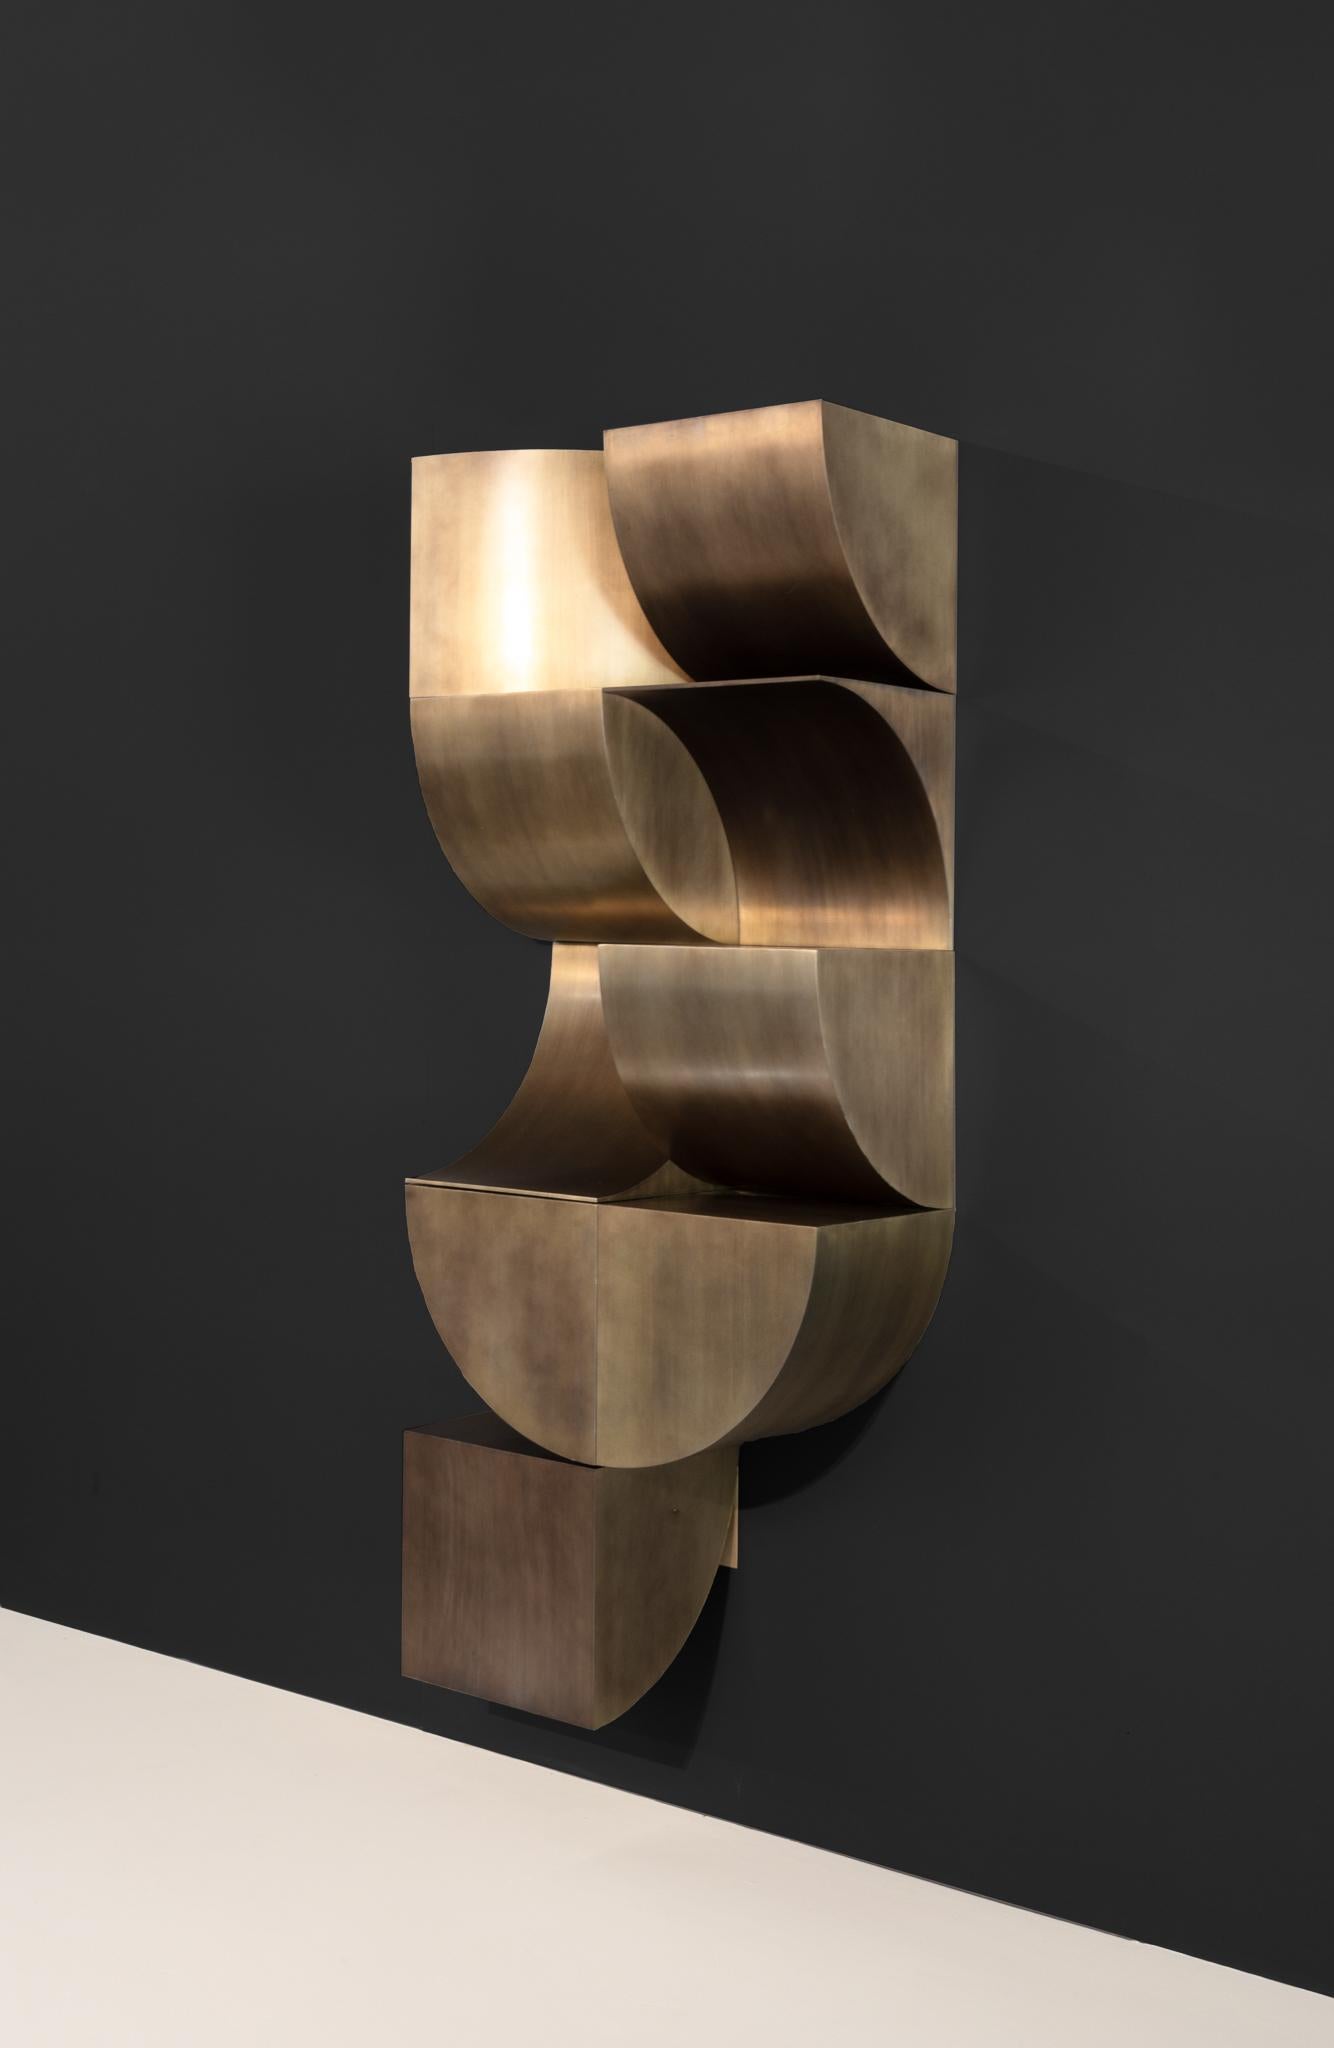 Librero Duna 1 by Eliana Portilla
Dimensions: D 35 x W 70 x H 175 cm.
Materials: Steel with brass coat.

This shelf is made of nine modular pieces. Please contact us.

I’m inspired by the balance, asthetics, color and space of geometrics. Always